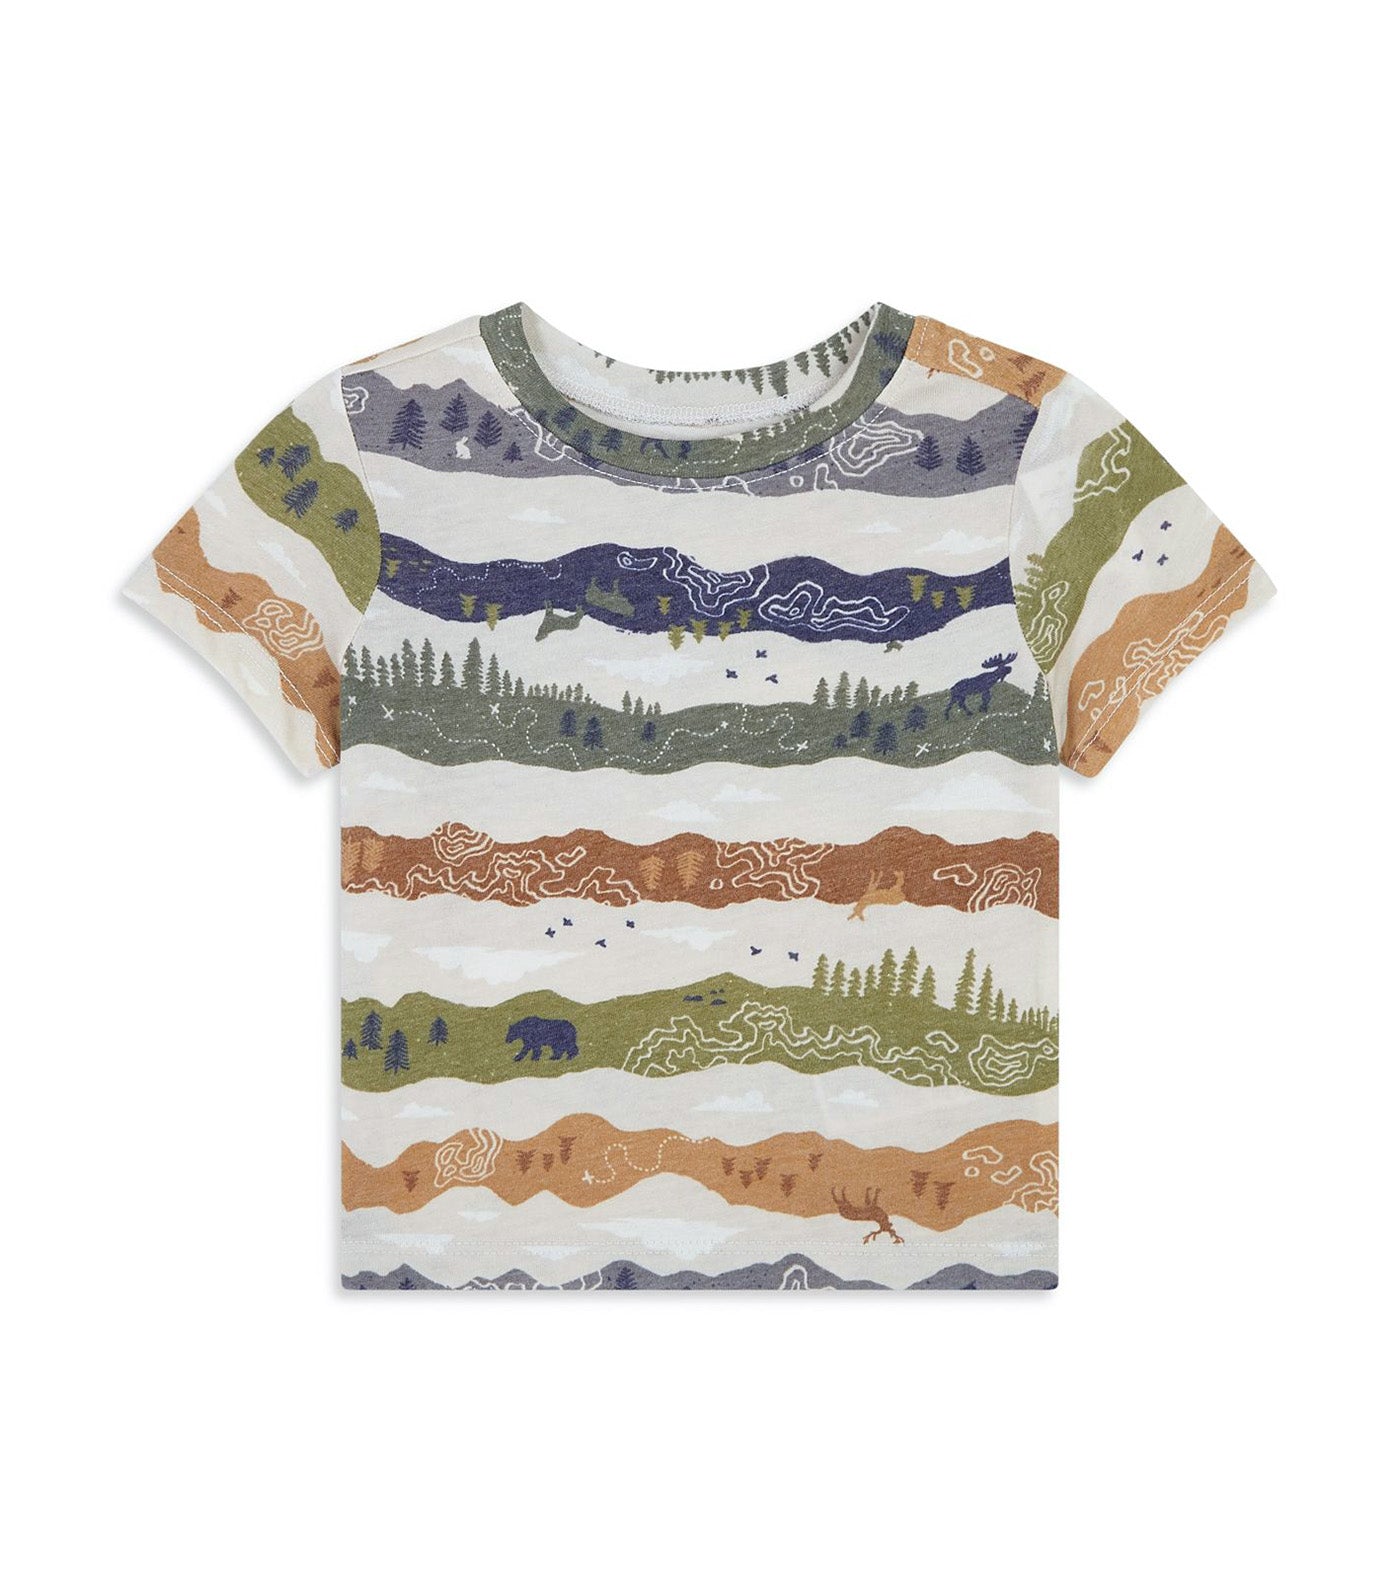 Unisex Printed T-Shirt for Toddler - Brown Scenic Top